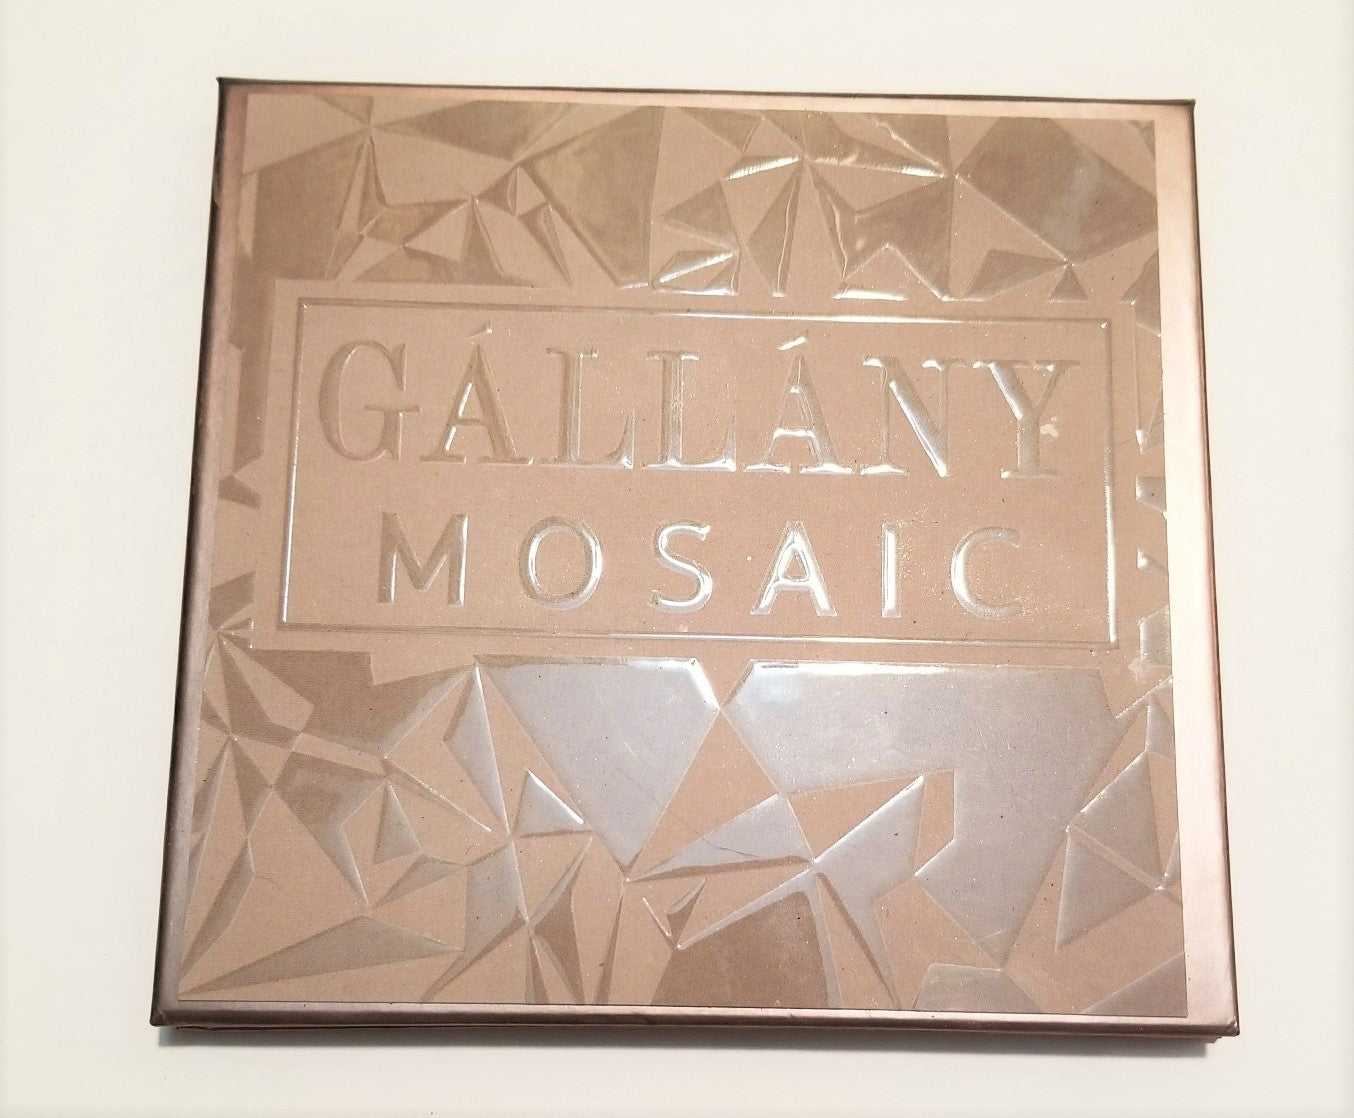 Review, Swatches, Makeup Trends 2018, 2019: Gallany Cosmetics Mosaic Eyeshadow Palette, Blush, Highlighter, Matte Eyeshadow, Metallic Eyeshadow, Shimmery Eyeshadow, Palette